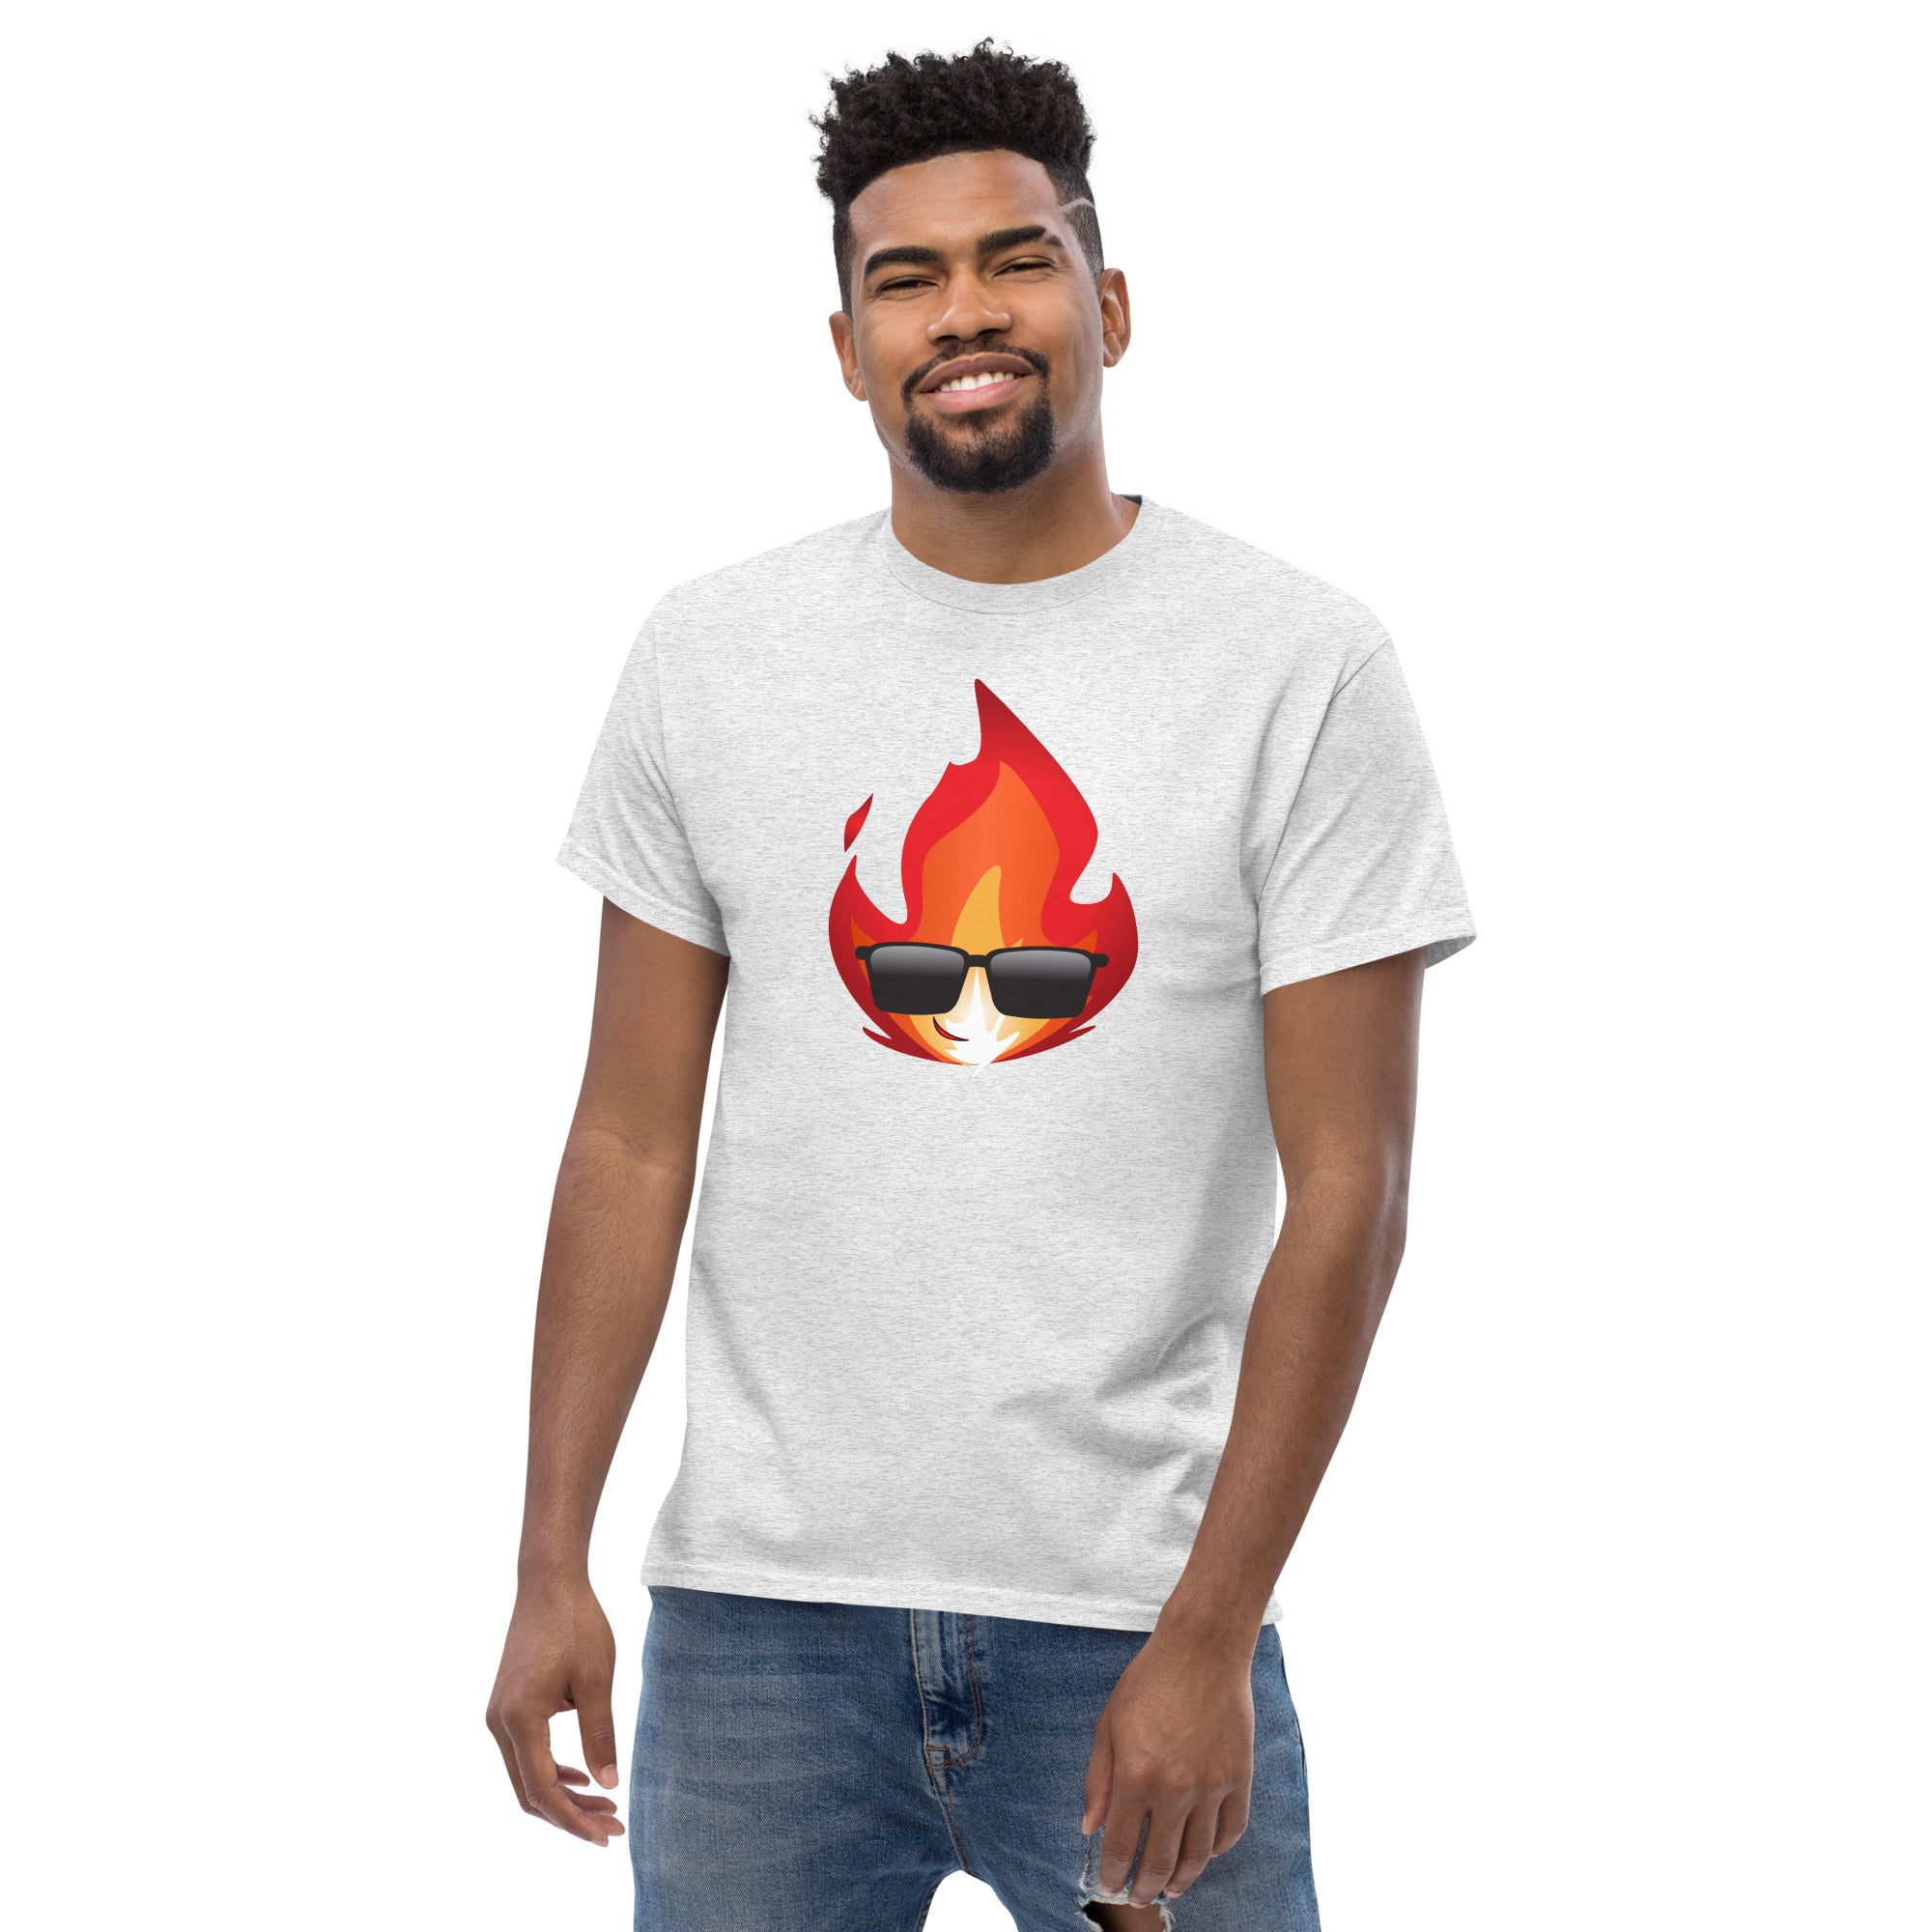 Men's Novelty T Shirts Graphic - Cool Fire